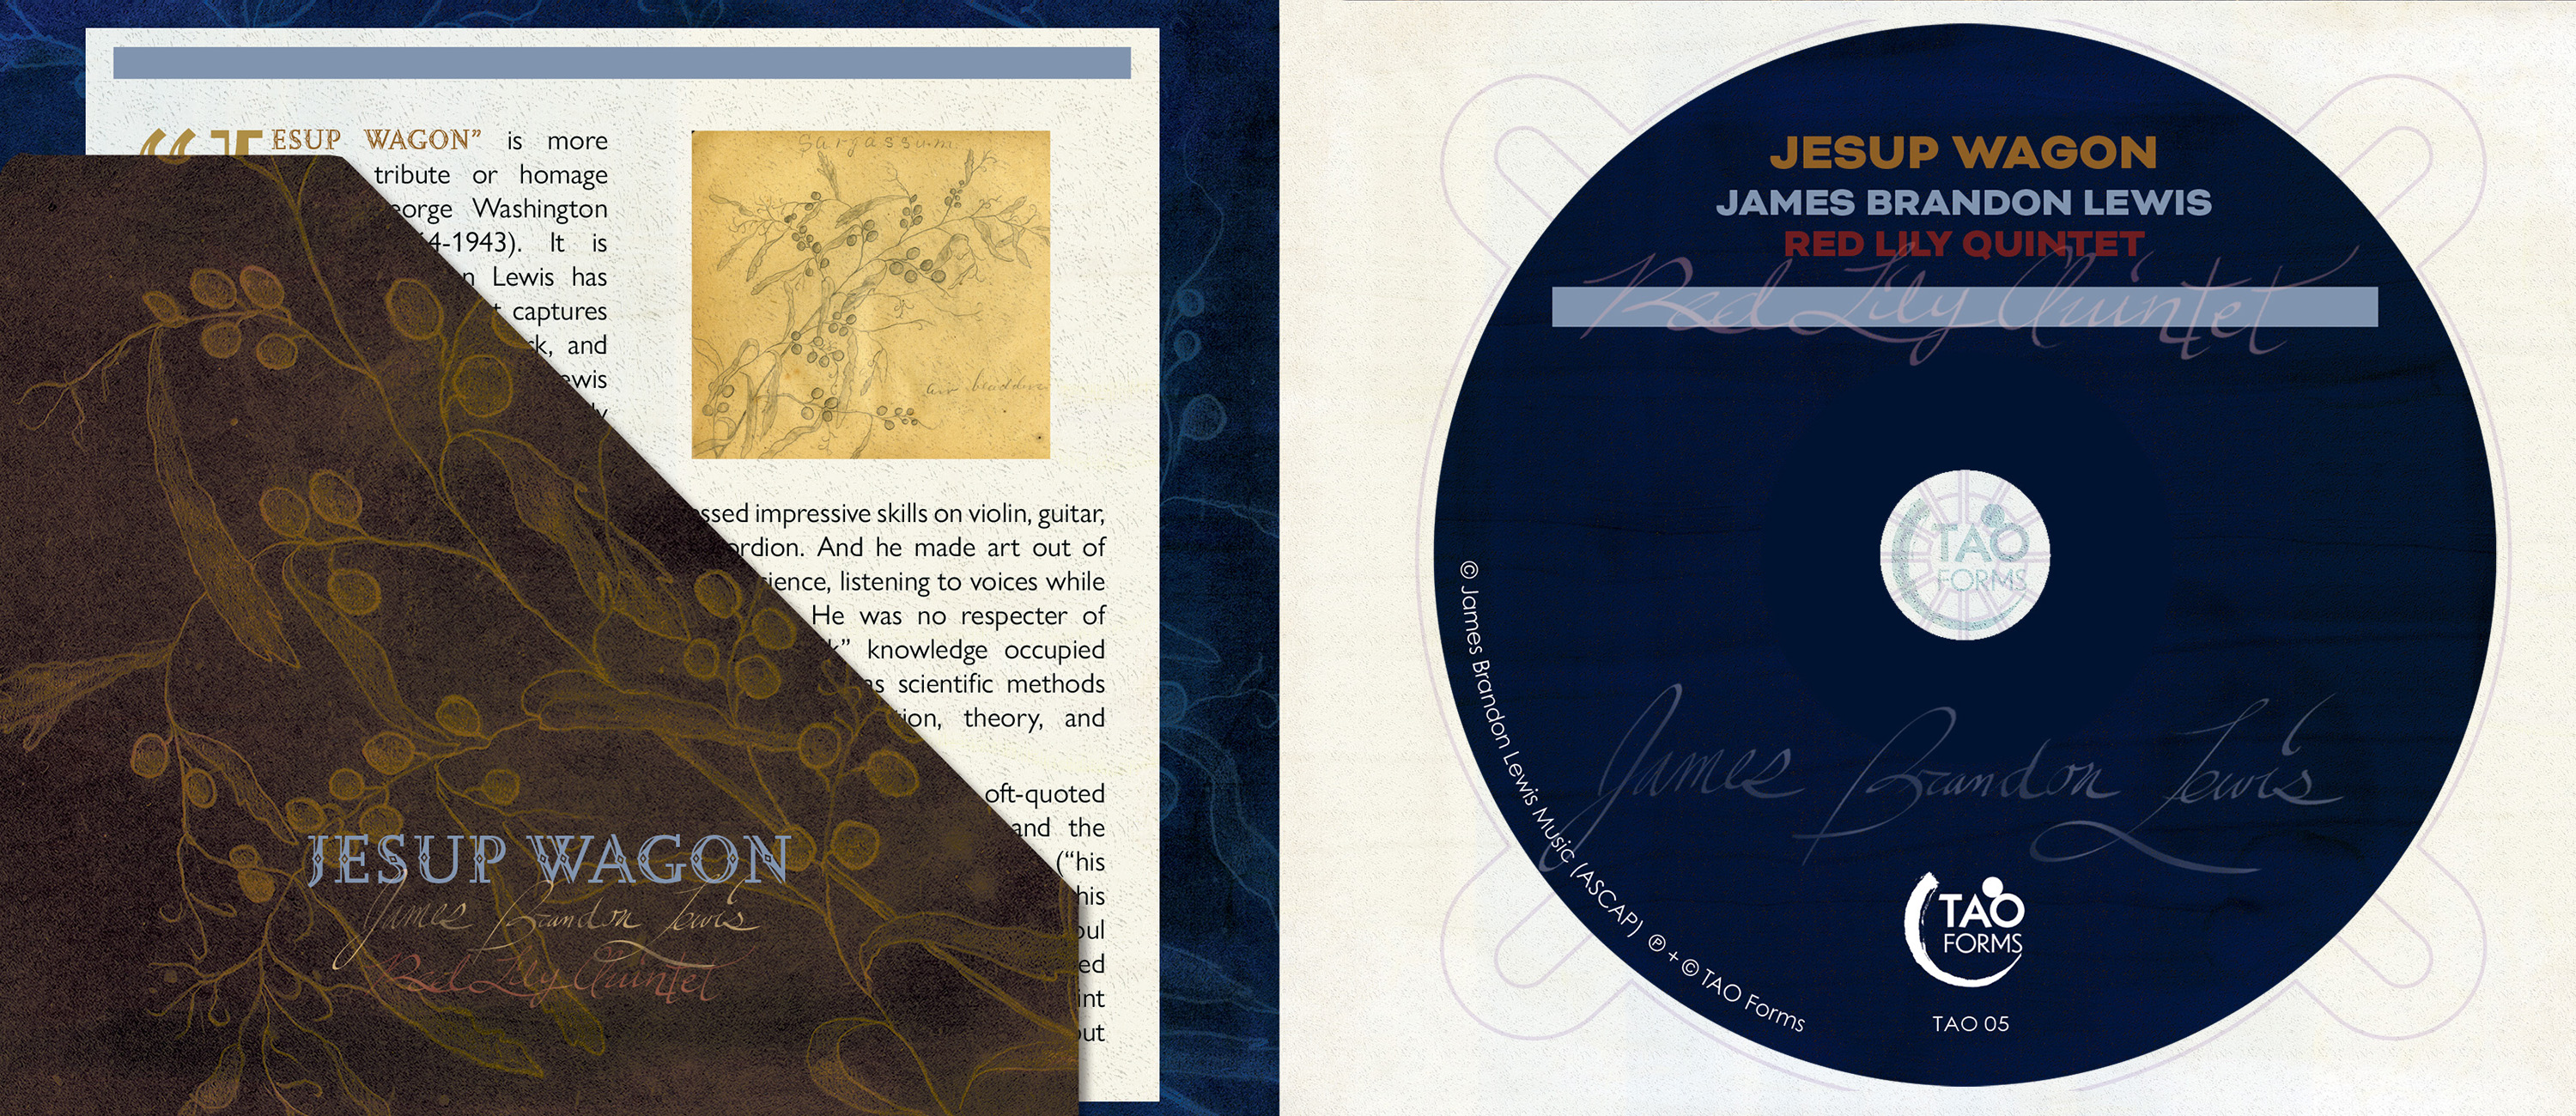 cd interior with accordian booklet and CD in place for Jesup Wagon by James Brandon Lewis Red Lily Quintet